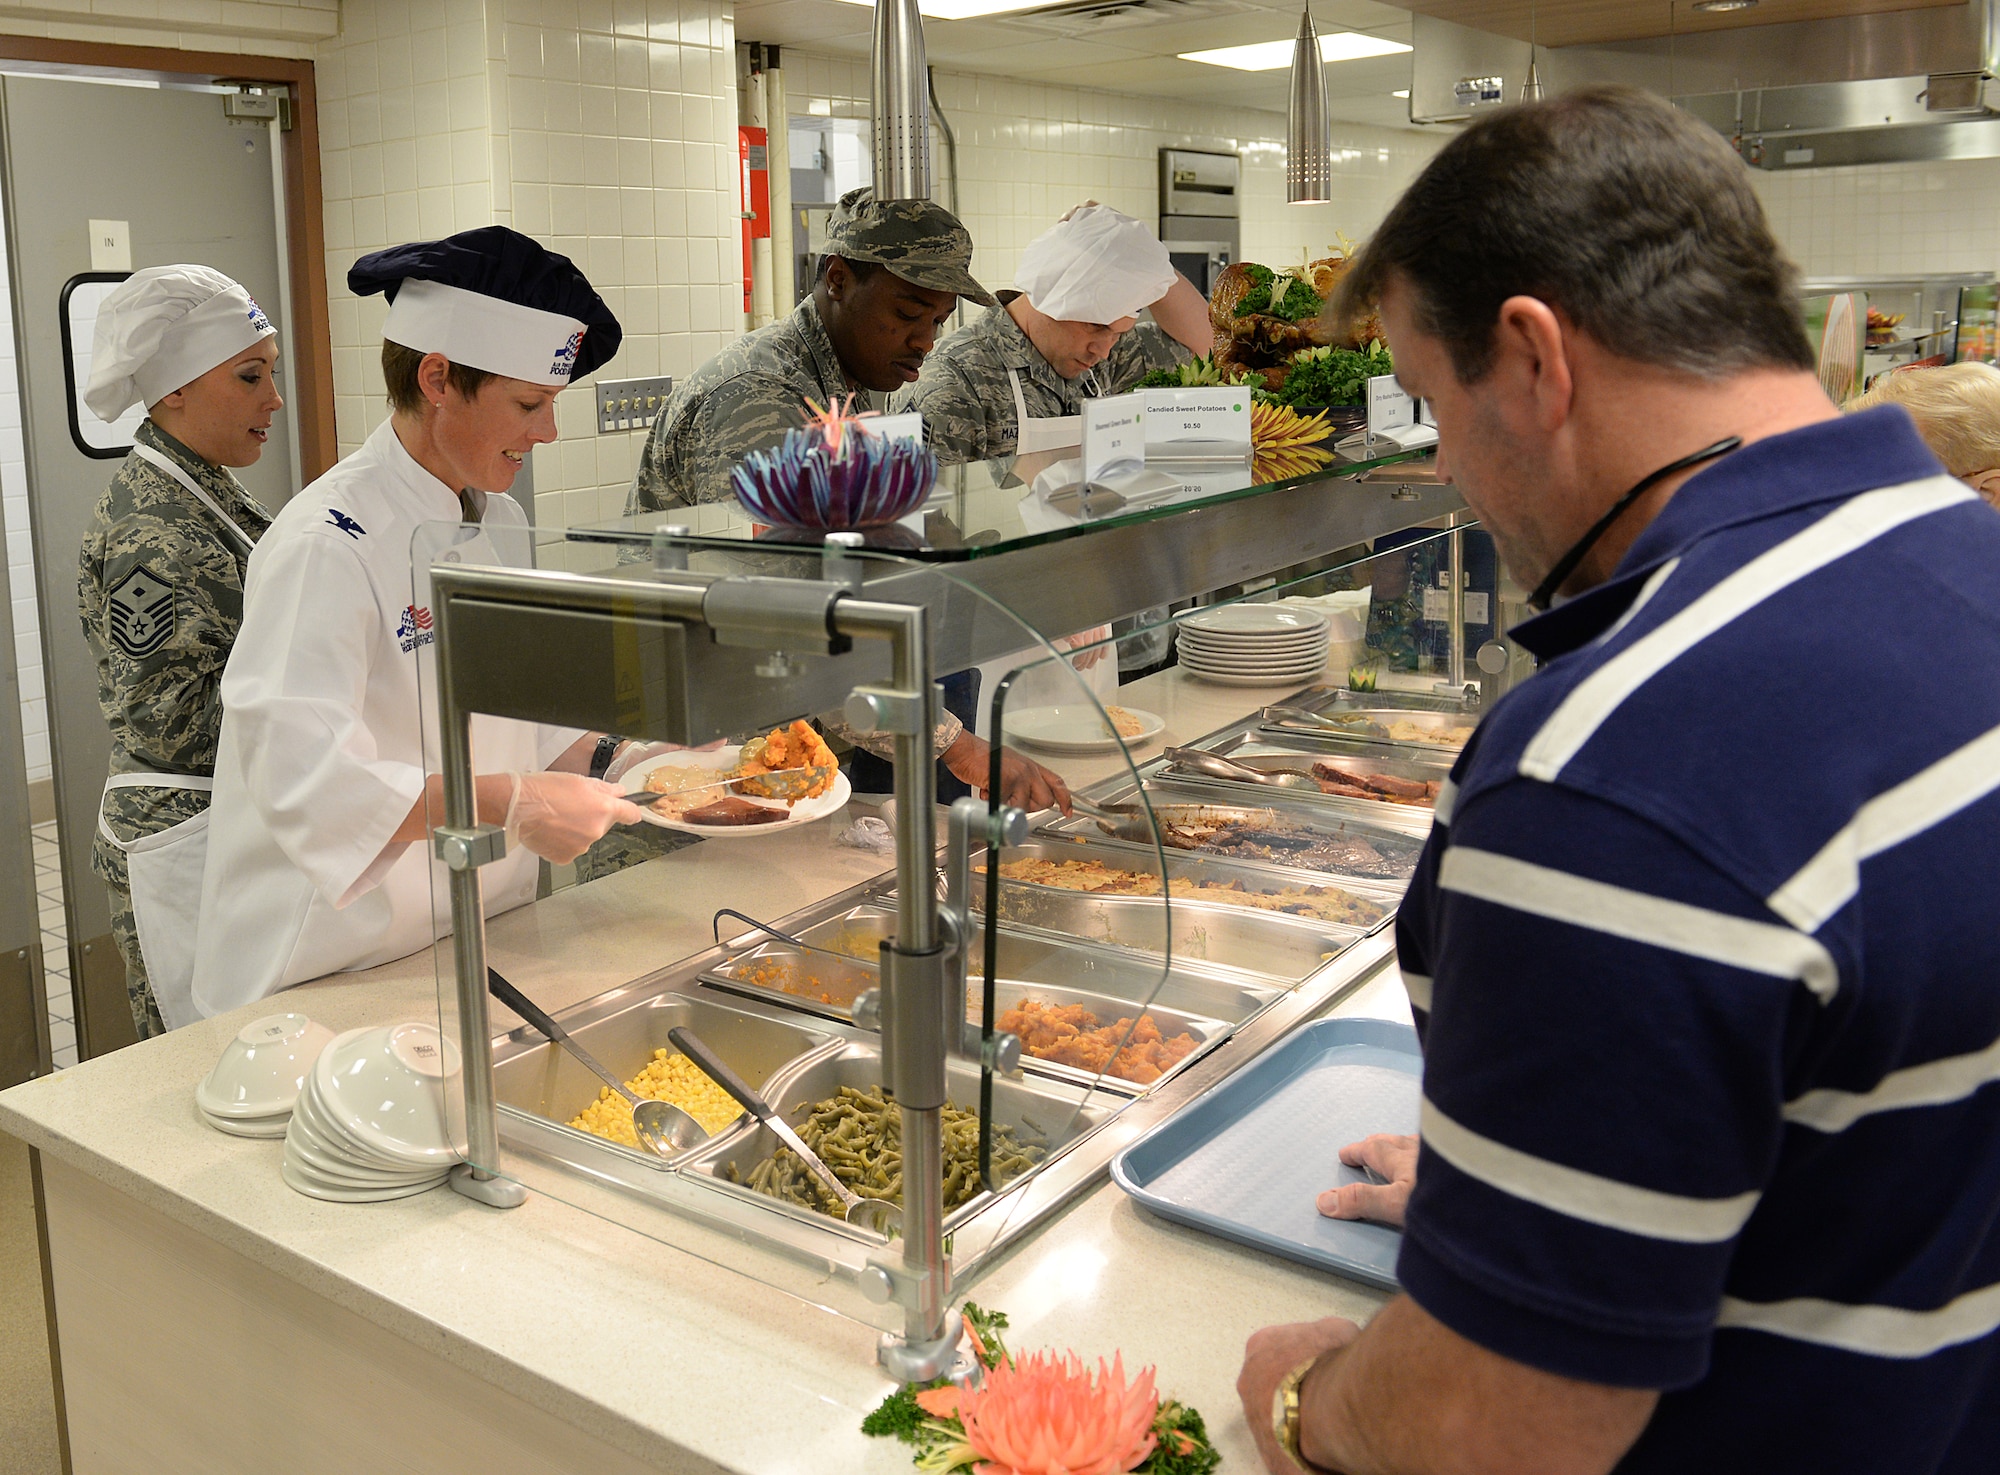 Col. Kristin Goodwin, 2nd Bomb Wing commander, serves food during the Red River Dining Facility Thanksgiving lunch on Barksdale Air Force Base, La., Nov. 27, 2014. Leadership across the base volunteered to show support to Airmen who weren’t able to be with their families for the holiday. (U.S. Air Force photo/ Airman 1st Class Curt Beach)